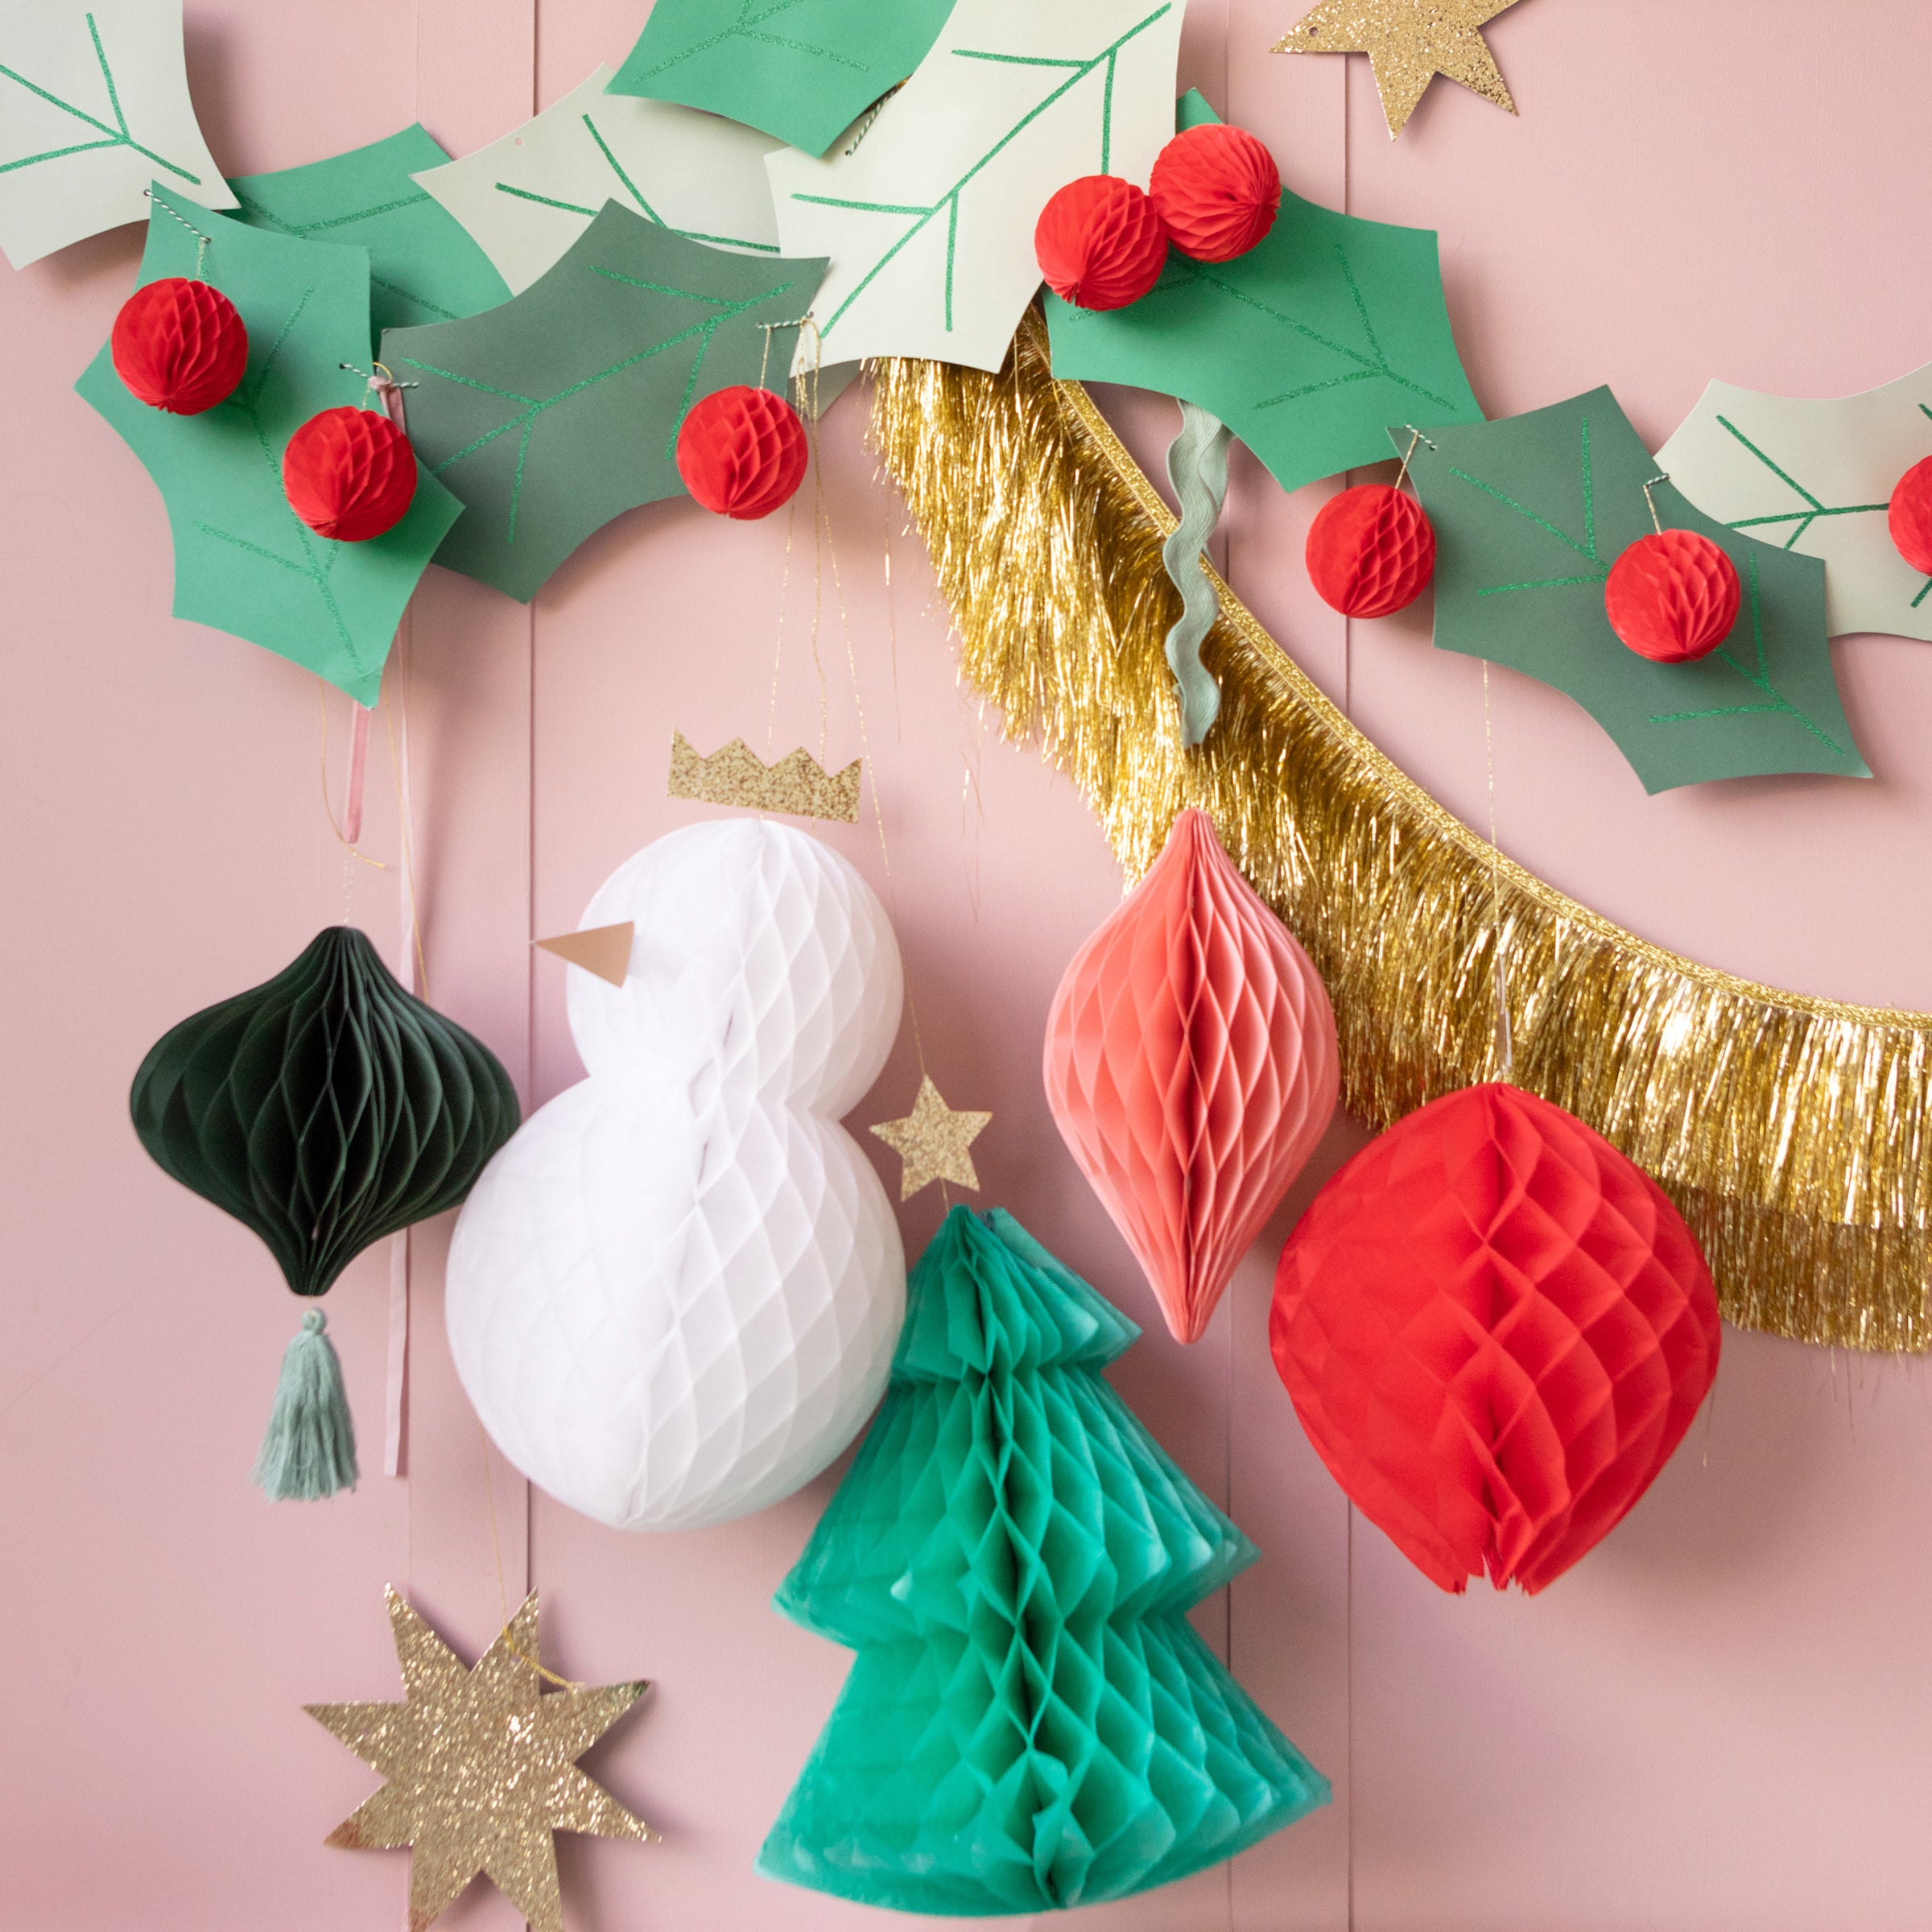 This set includes a reindeer decoration, snowman decoration, a Christmas tree and bauble.